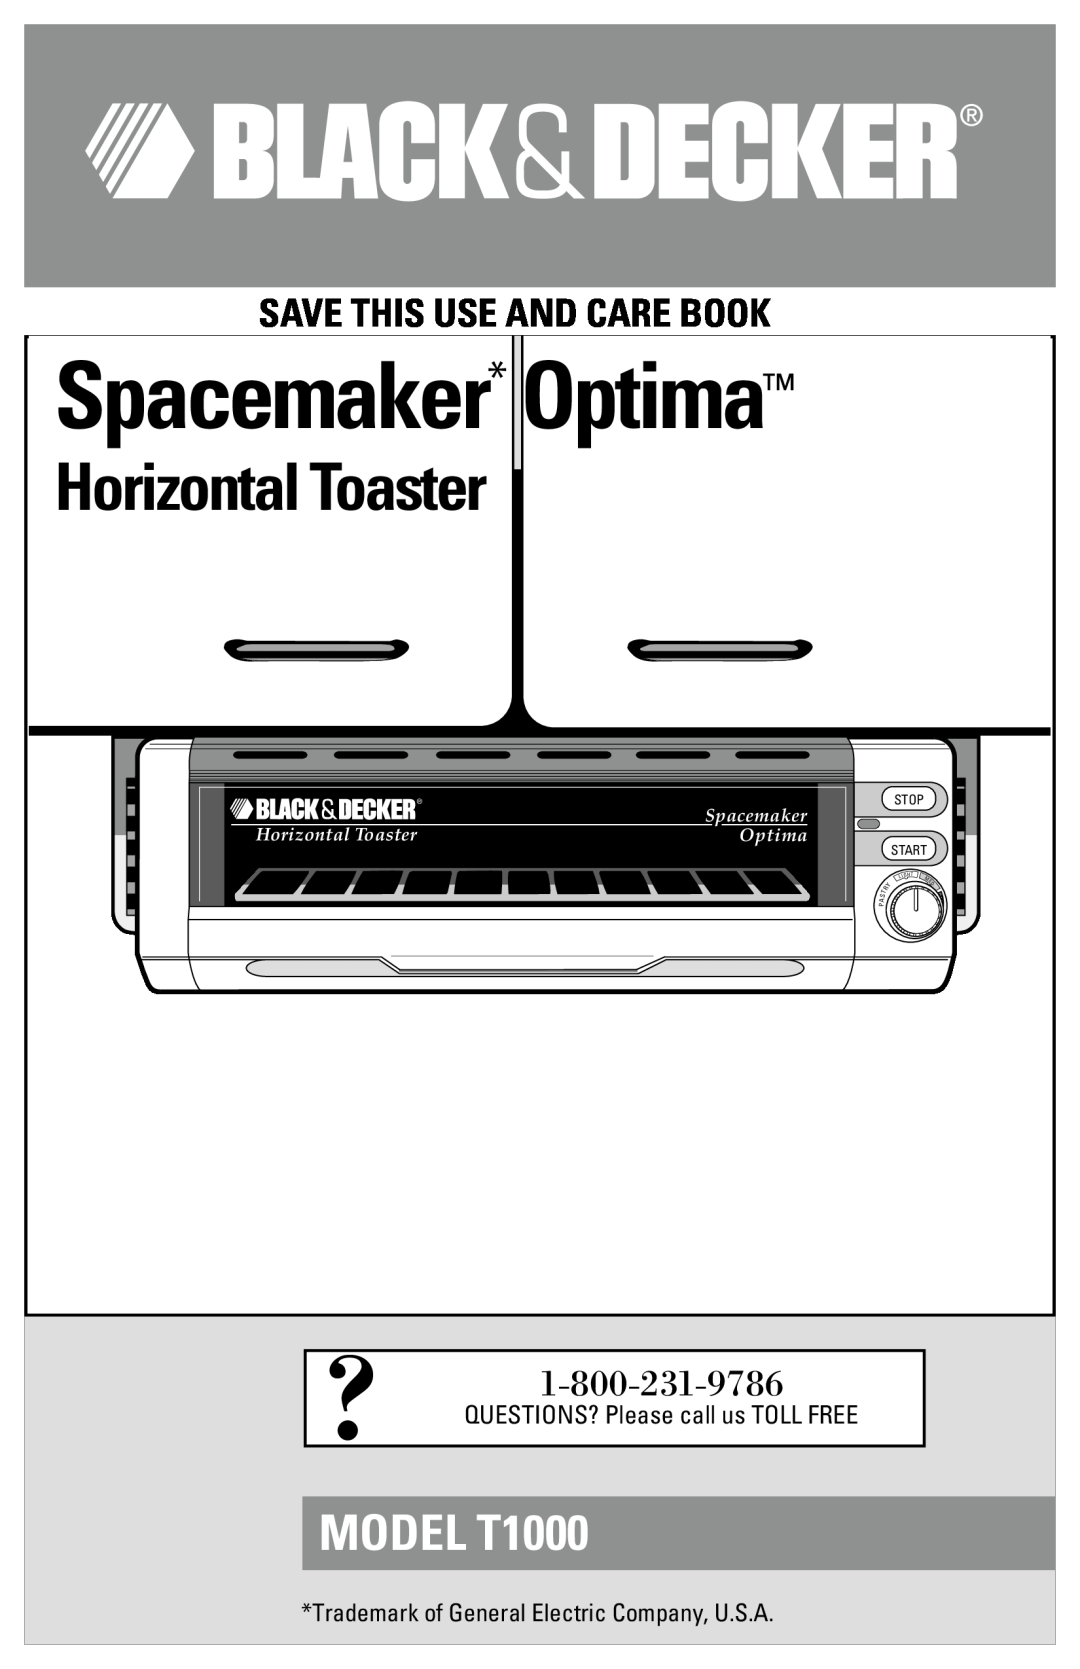 Black & Decker manual MODEL T1000, Spacemaker* Optima, Horizontal Toaster, Save This Use And Care Book, Ligh T 